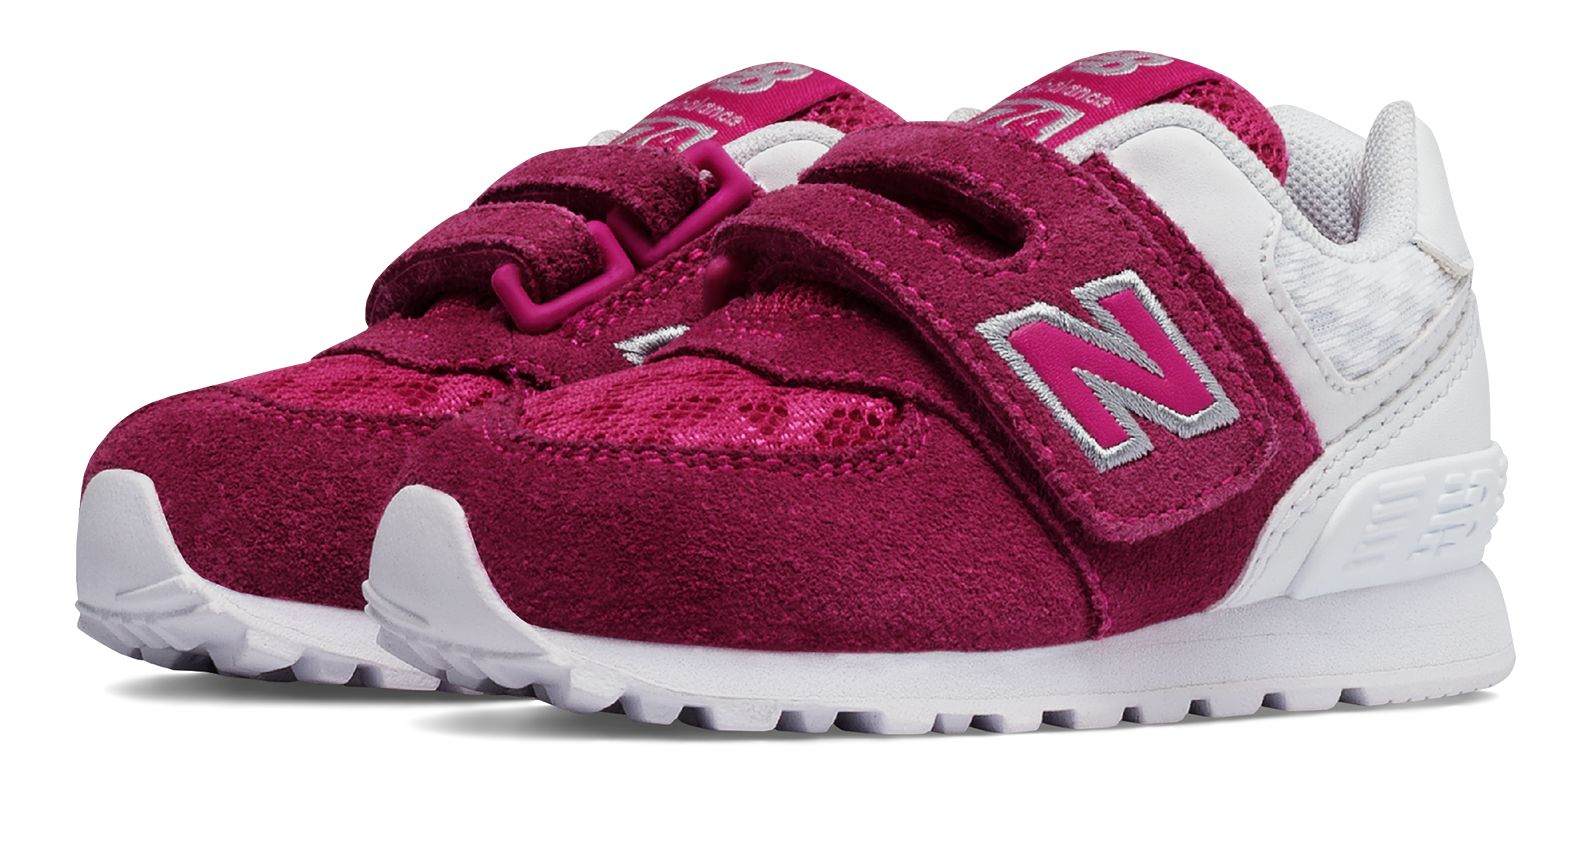 574 Search Results - 21 Results Found | New Balance USA